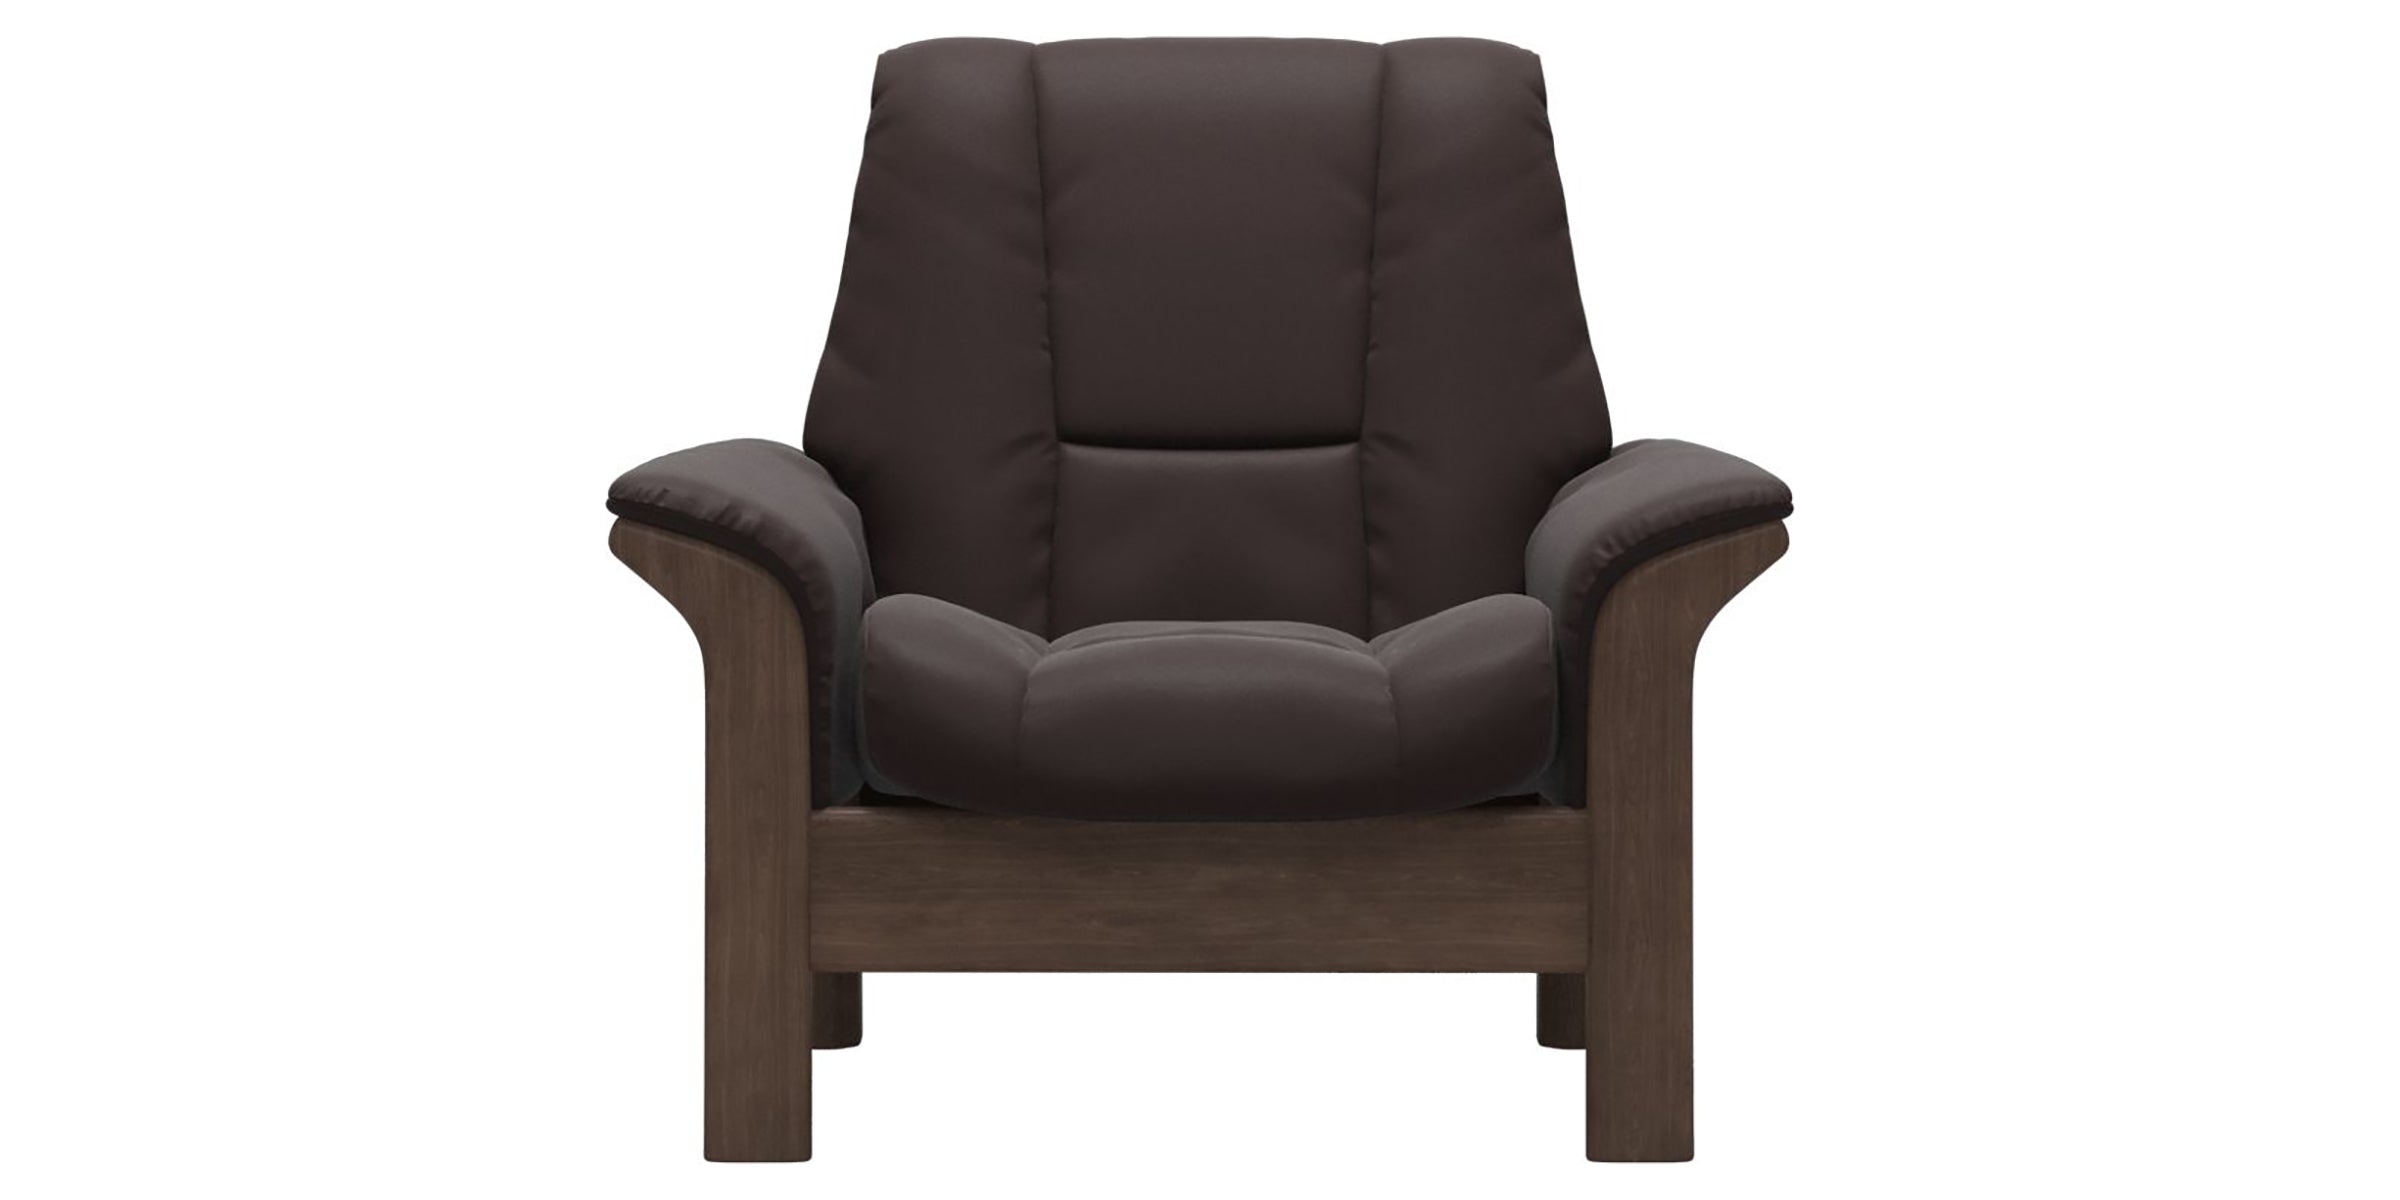 Paloma Leather Chocolate and Walnut Base | Stressless Windsor Low Back Chair | Valley Ridge Furniture